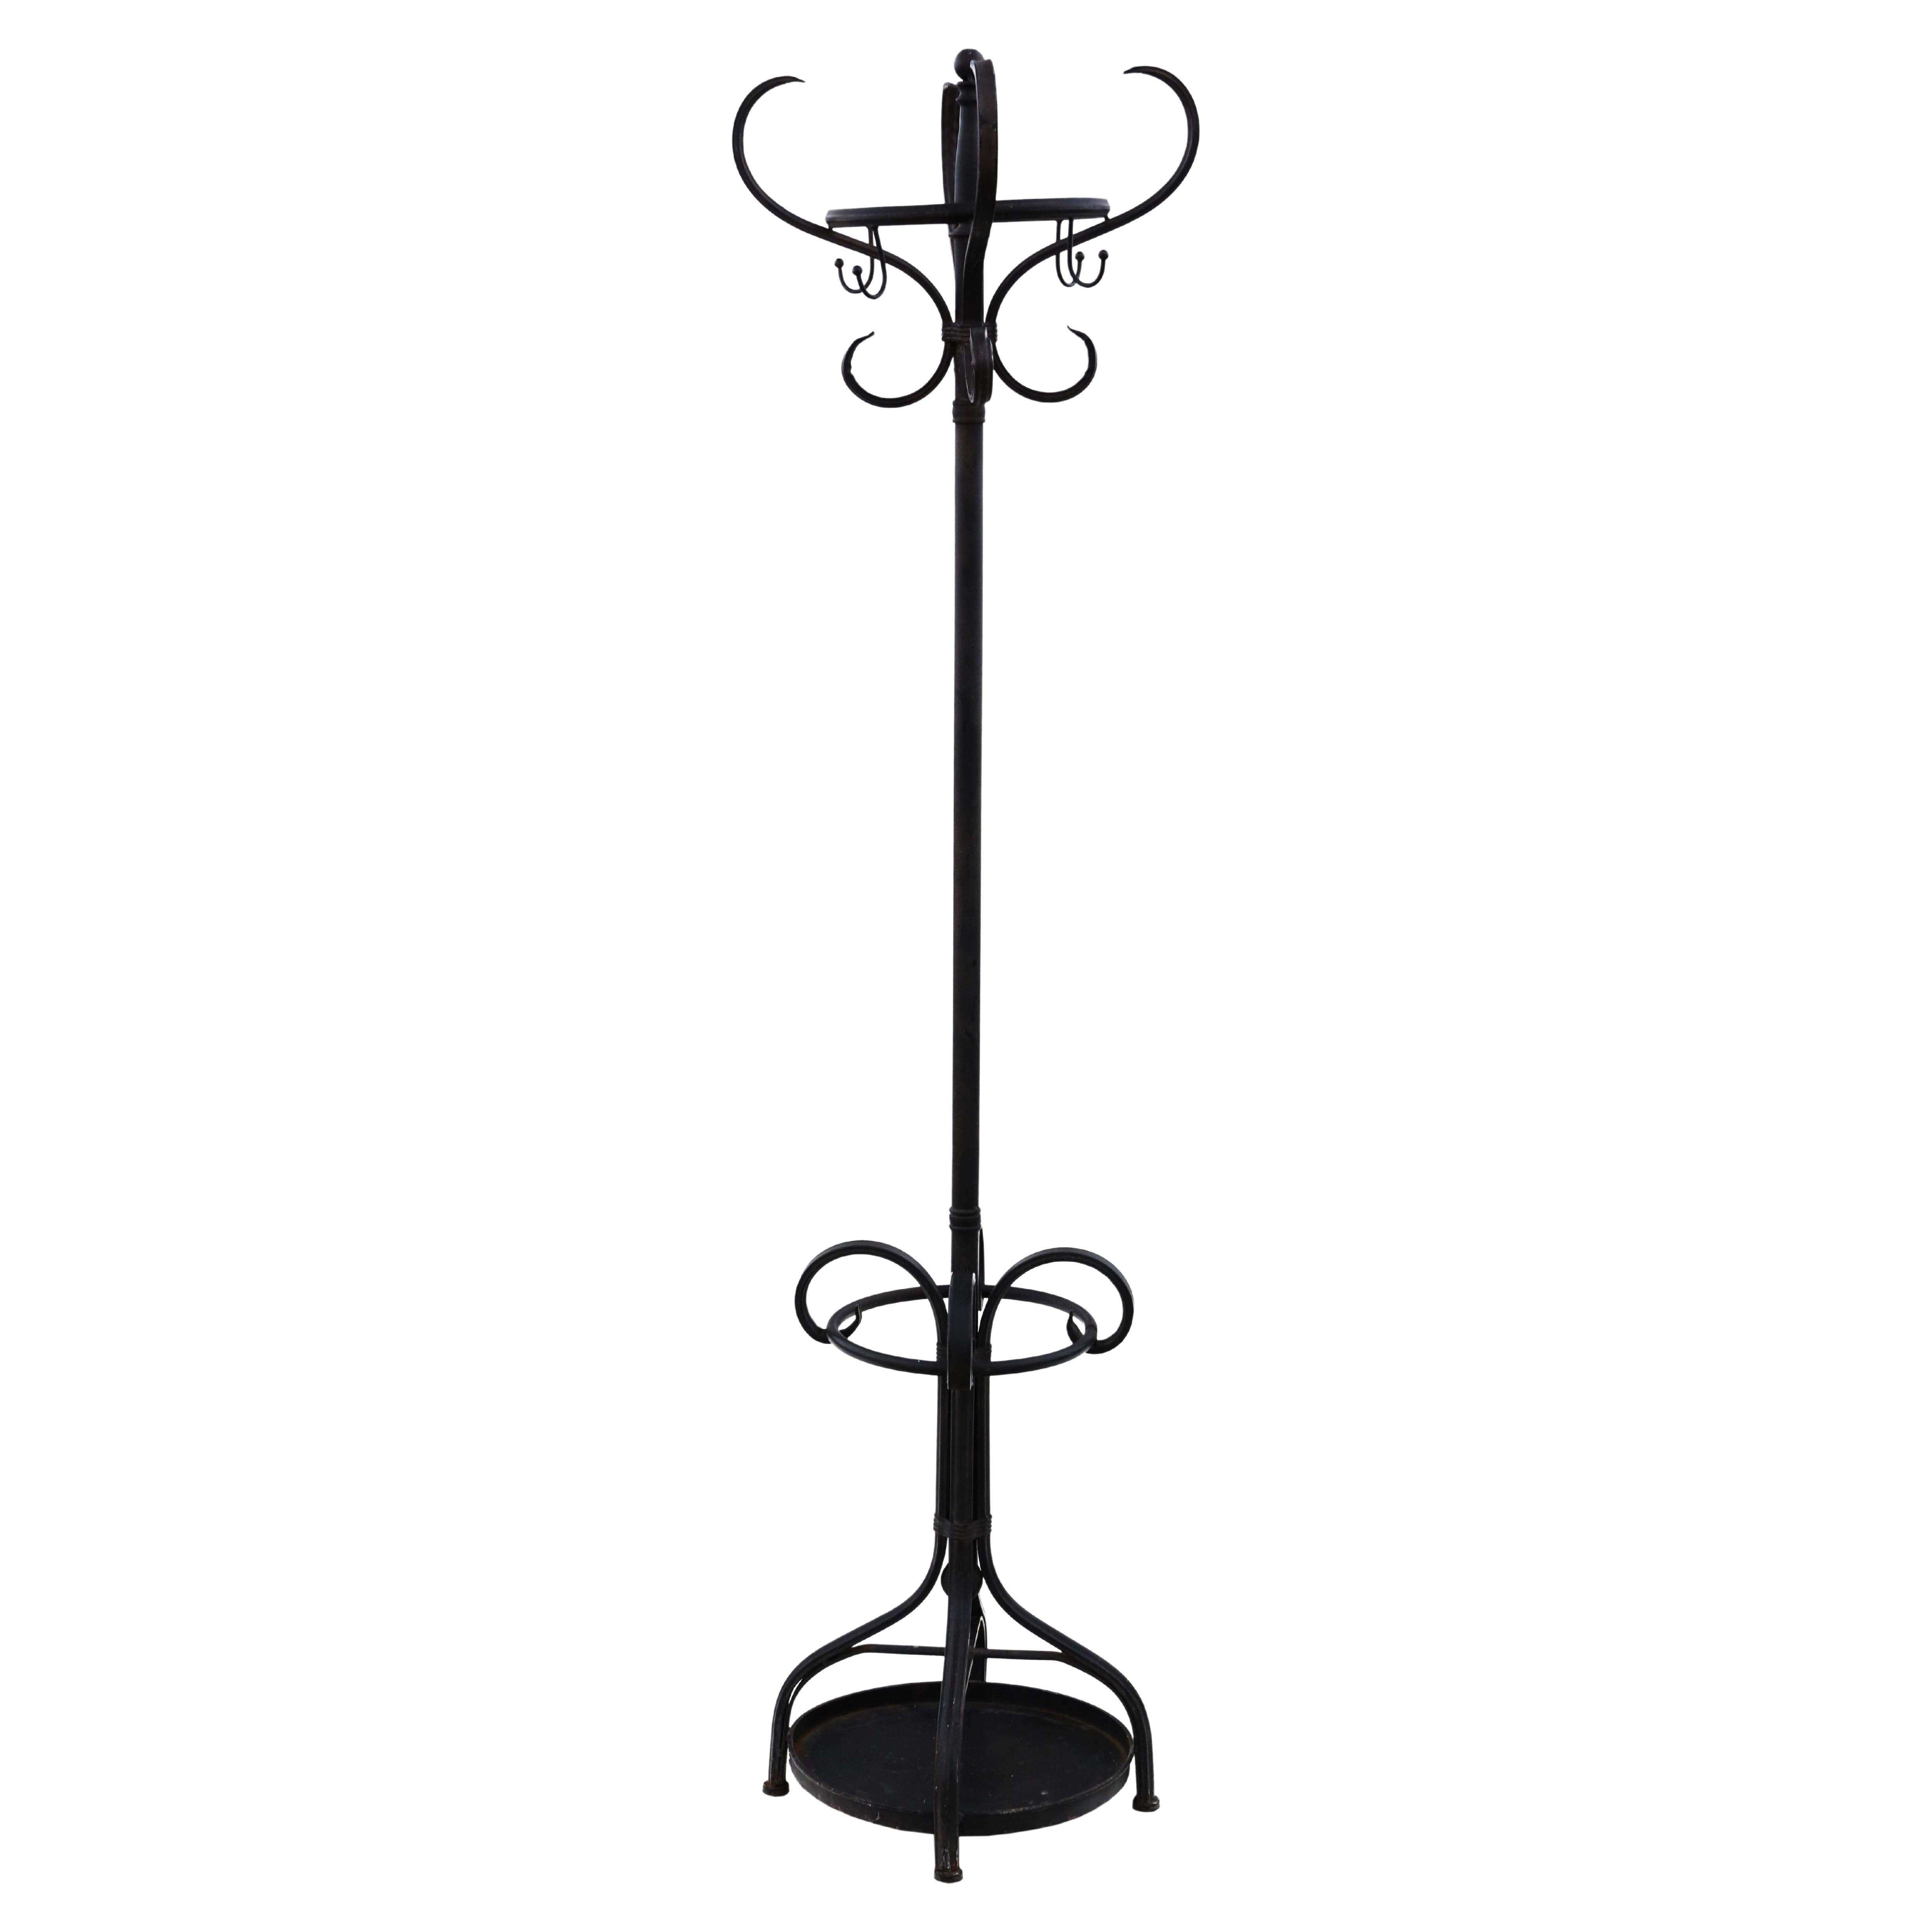  Vintage mid 20th Century black steel hall, coat or hat stand For Sale